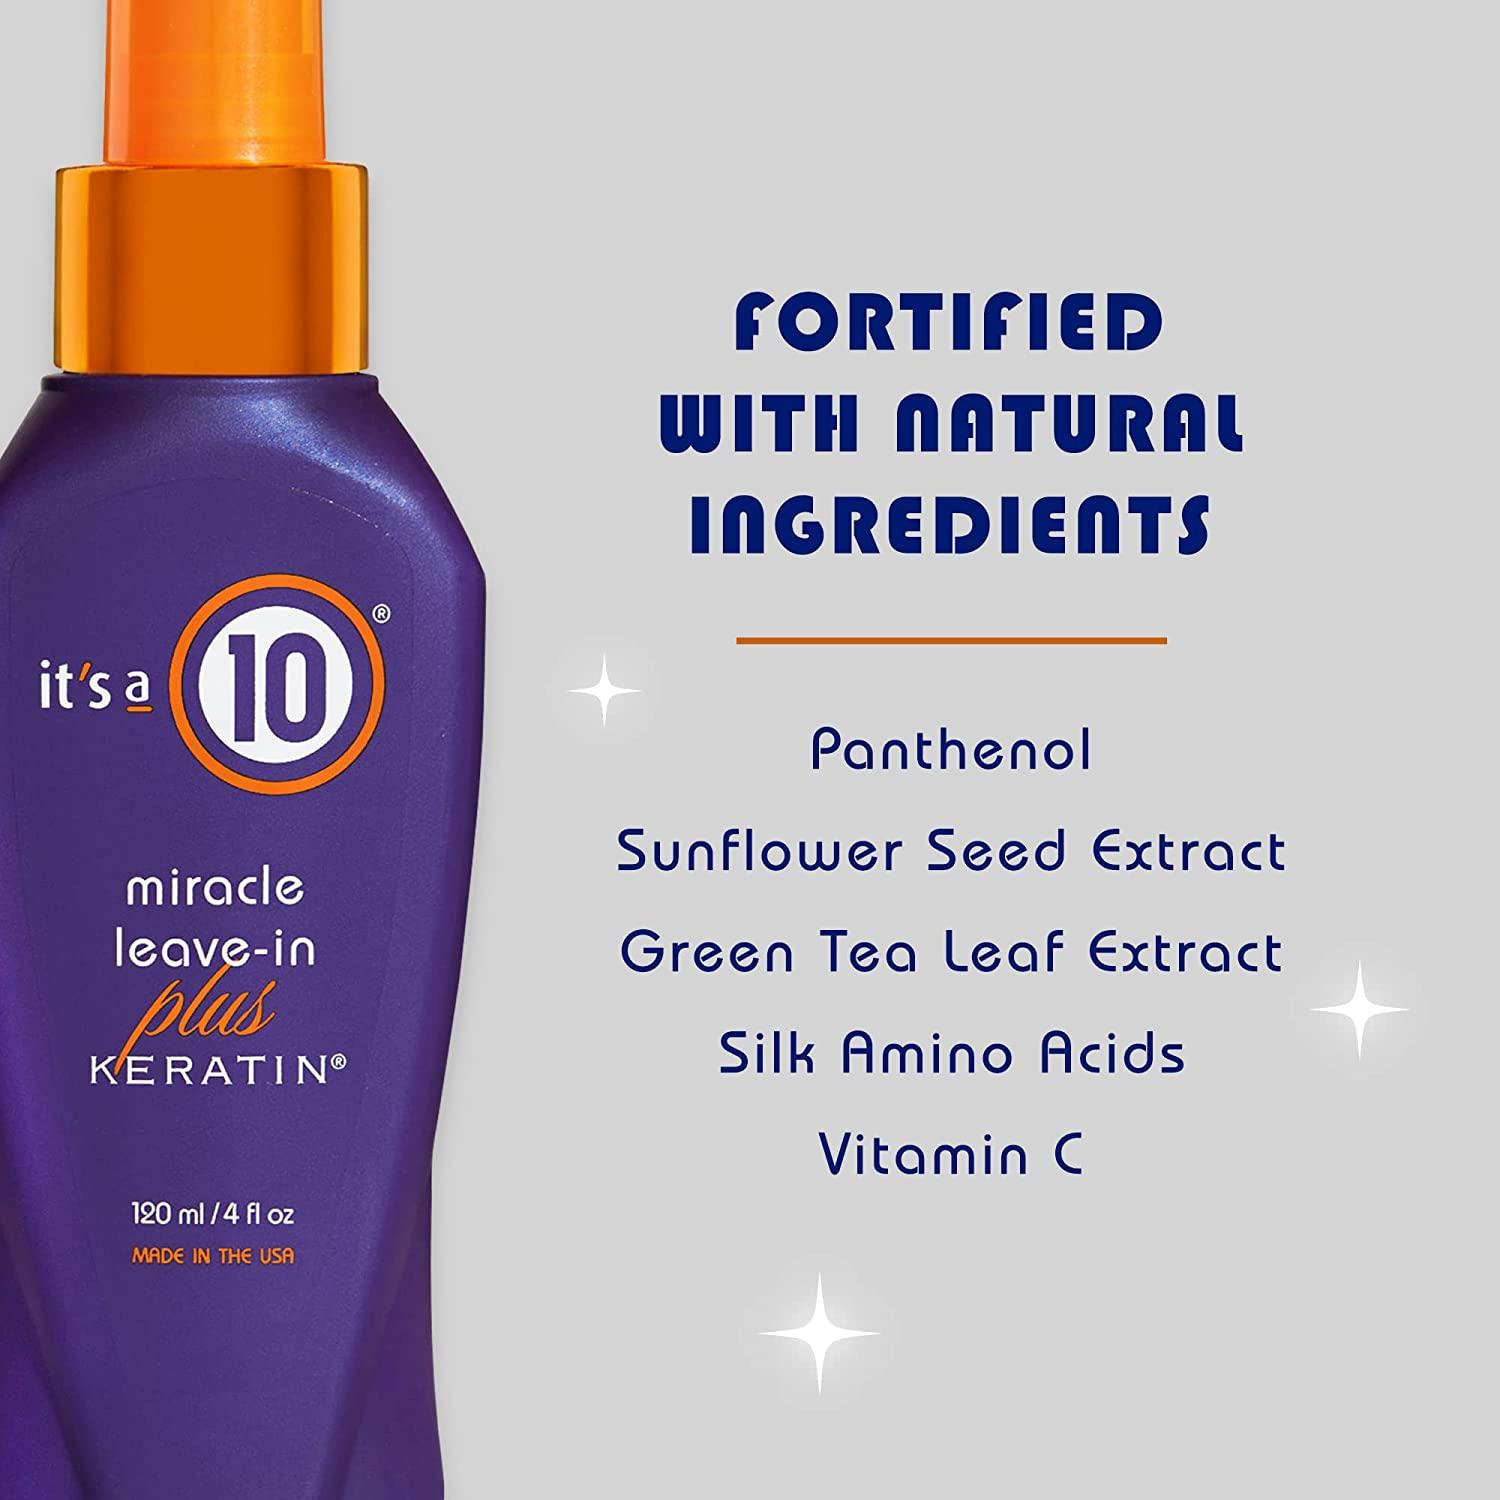 It's a 10 Haircare Miracle Leave-In Product, 4 fl. oz.